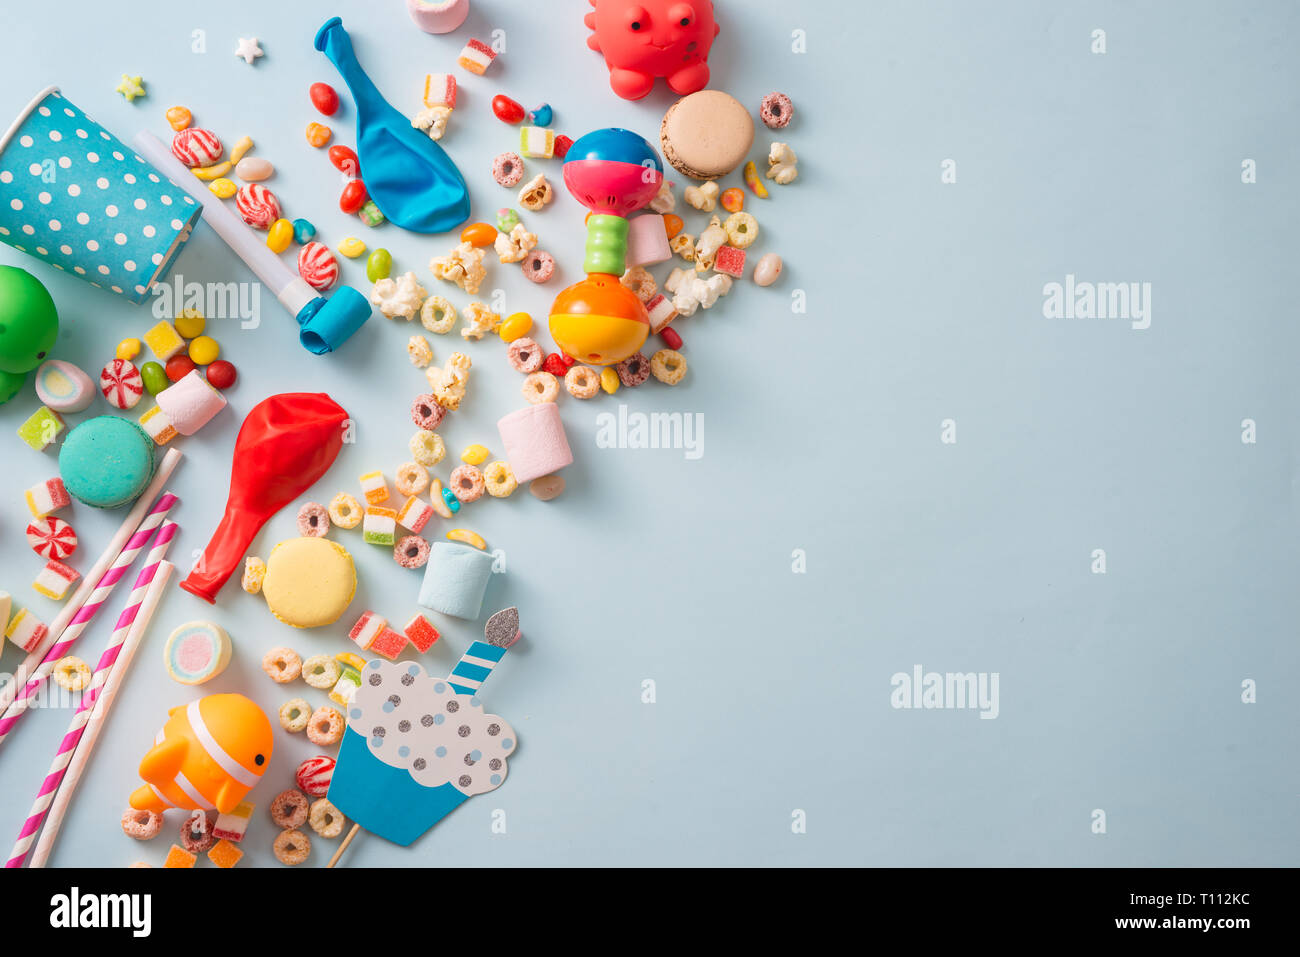 https://c8.alamy.com/comp/T112KC/girl-birthday-decorations-blue-table-setting-from-above-with-muffins-drinks-and-party-gadgets-background-layout-with-free-text-space-T112KC.jpg